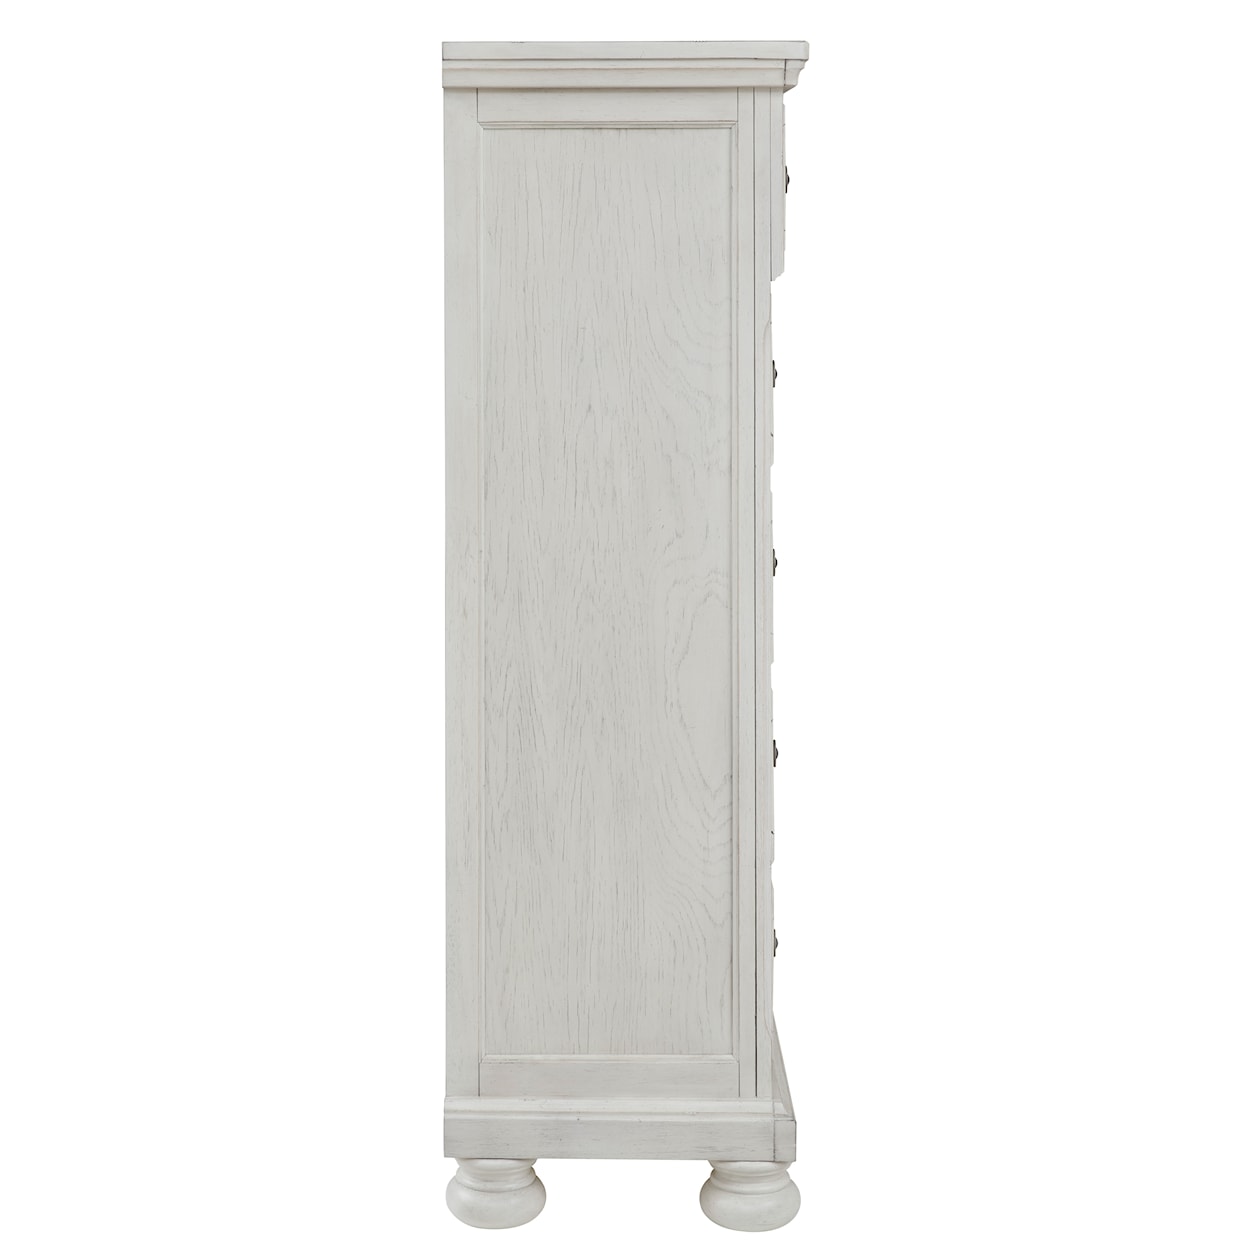 StyleLine Robbinsdale Chest of Drawers